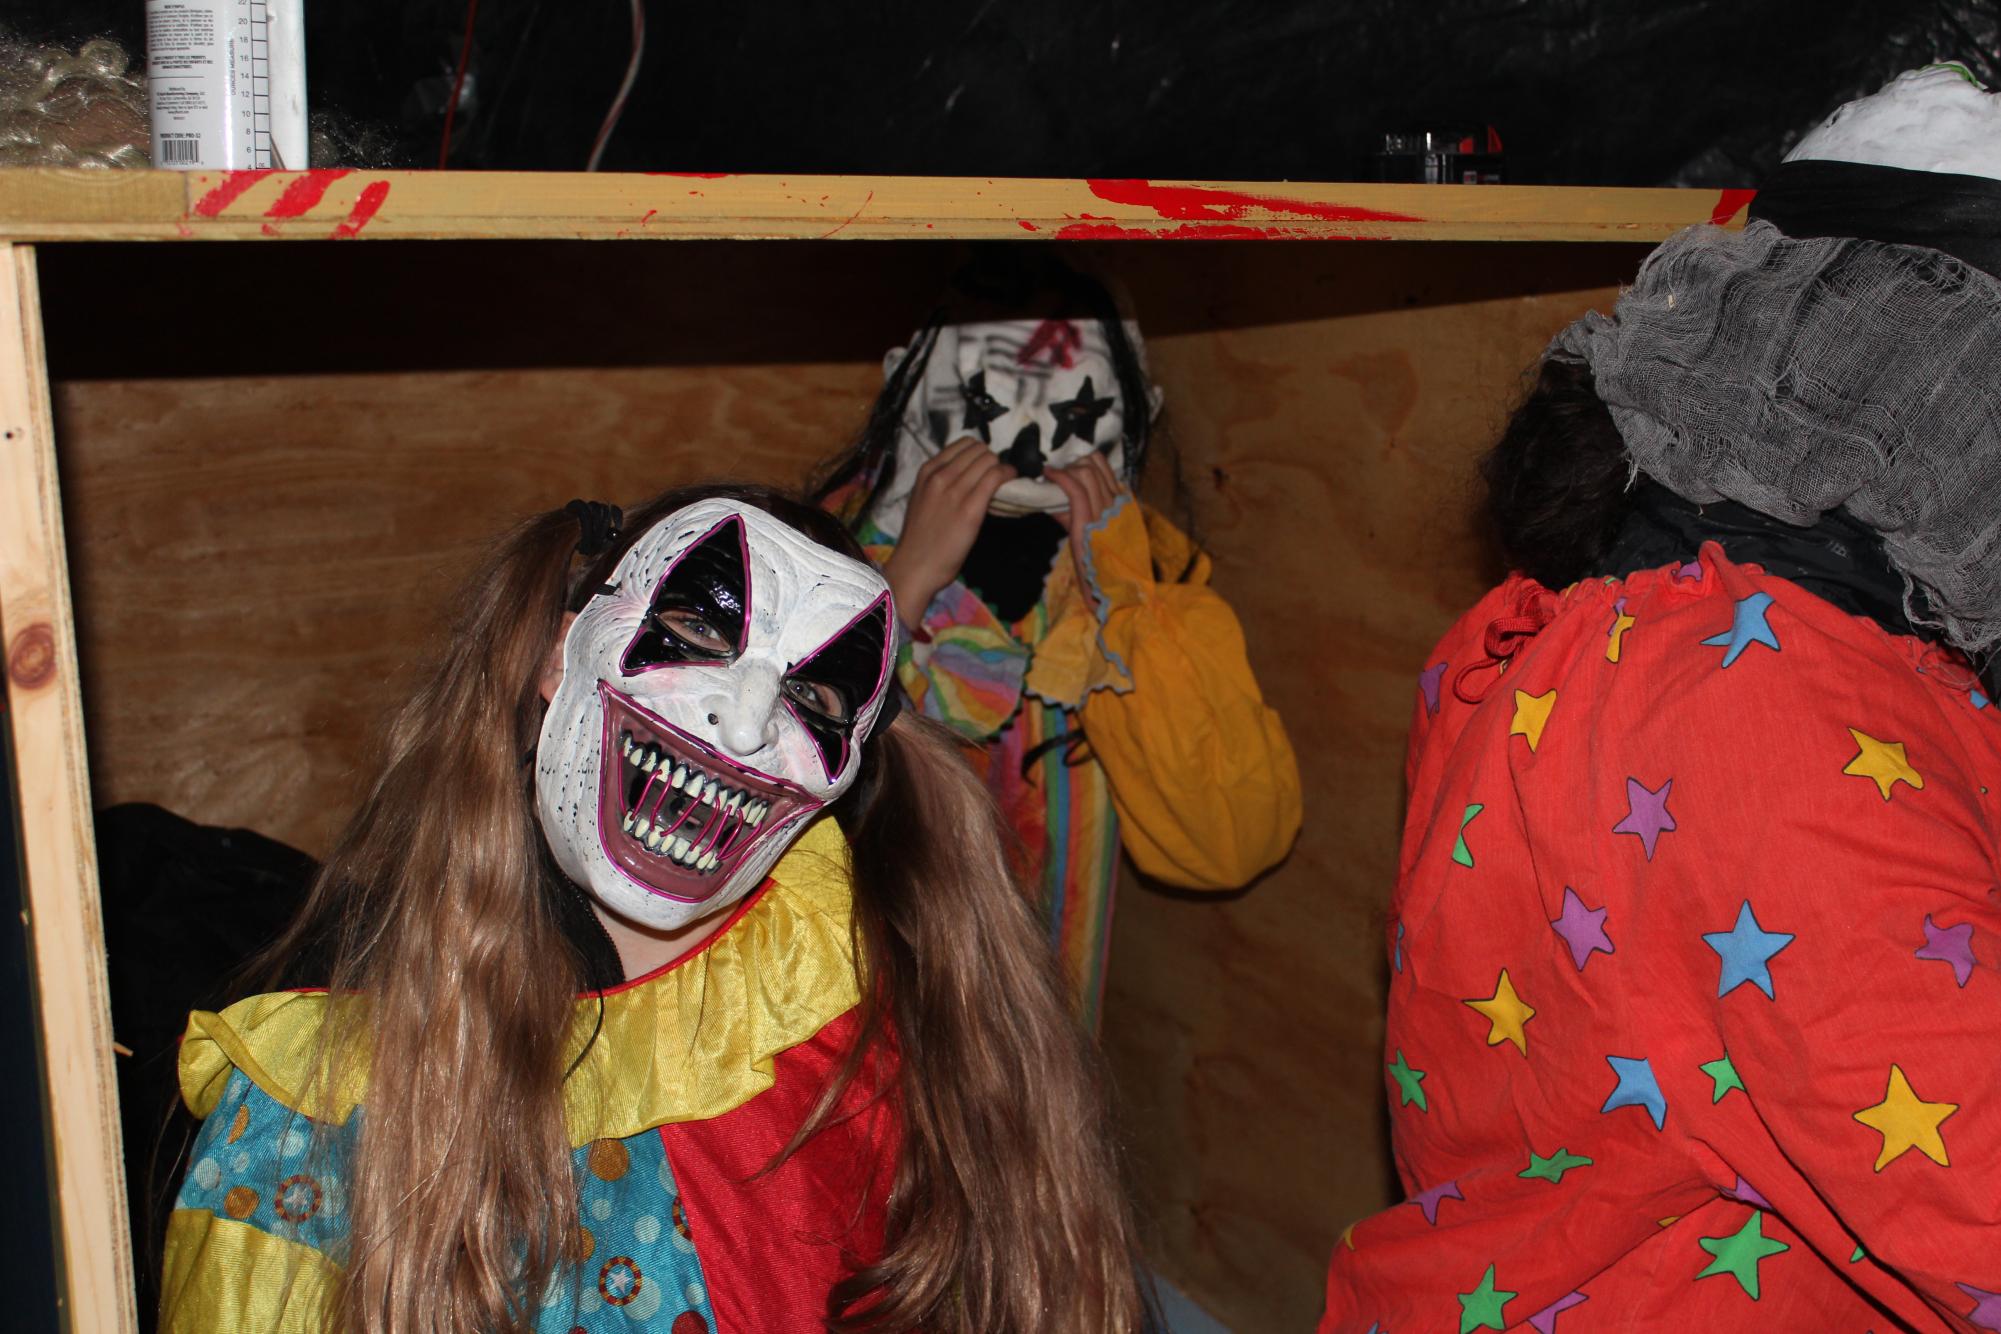 Some of the dedicated drama club members, dressed as clowns, attempt to scare passerby at the haunted house. 